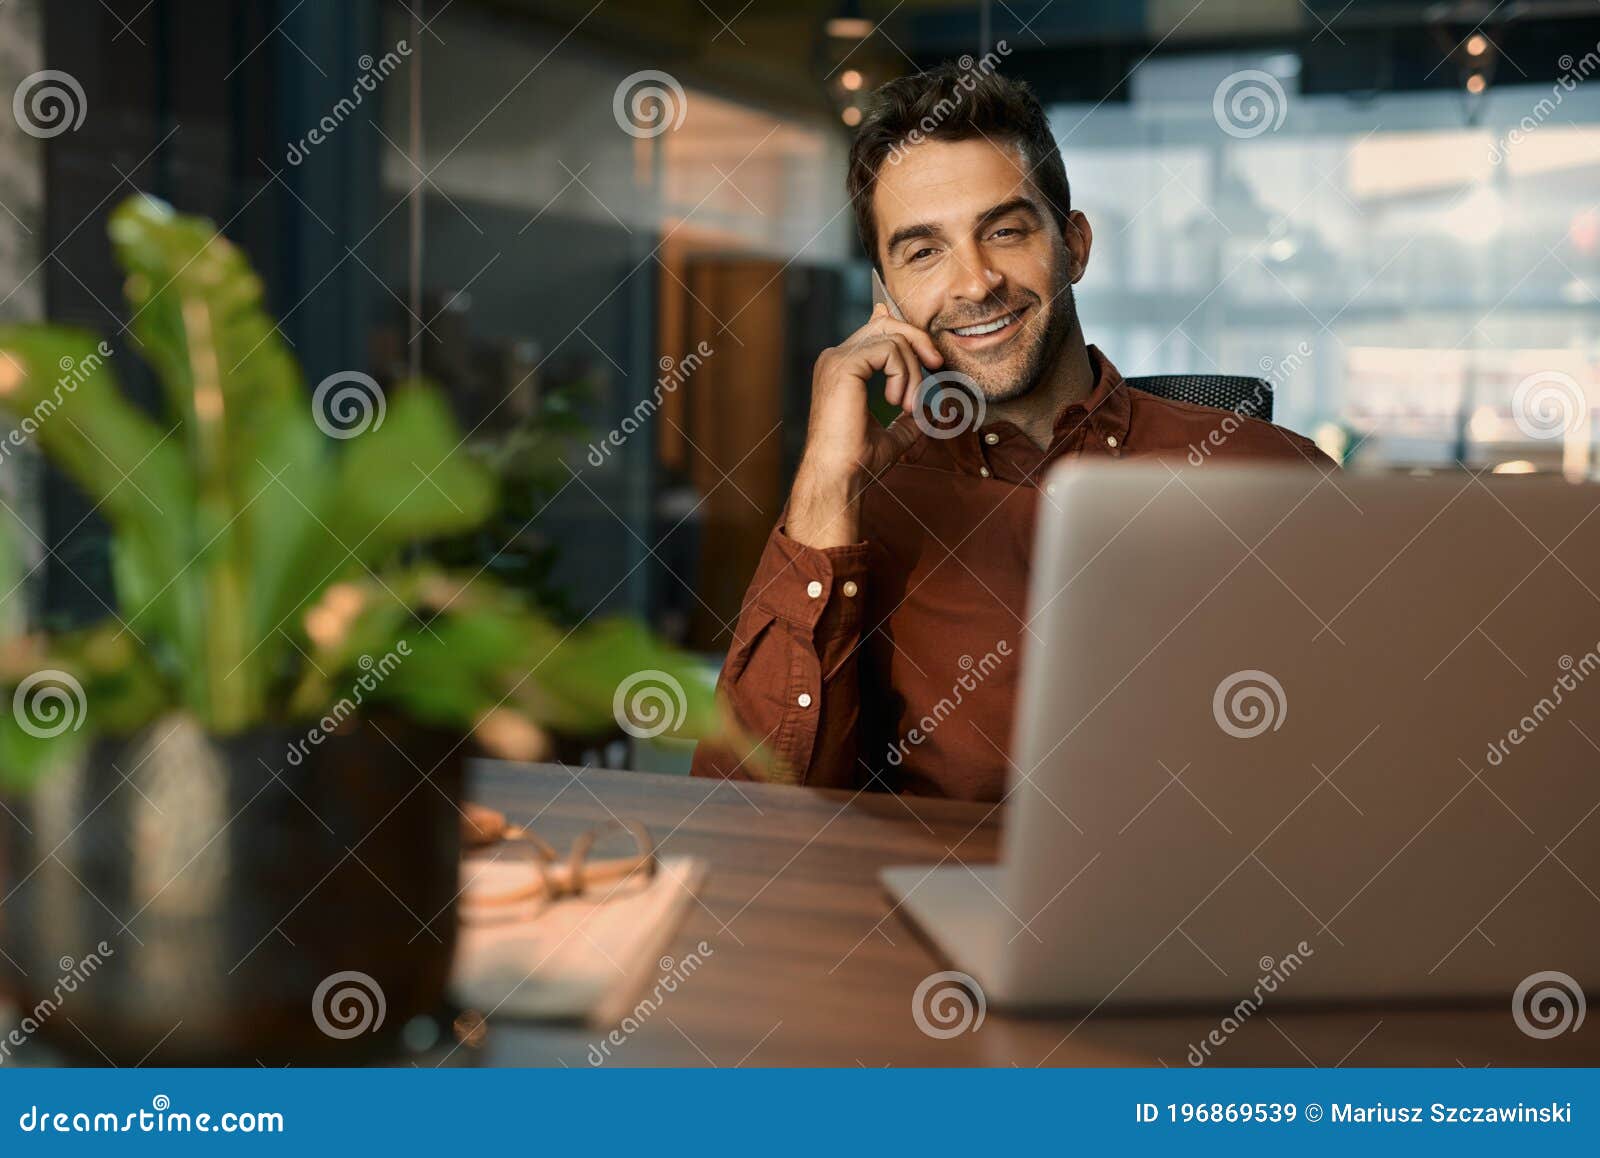 smiling businessman talking on a cellphone while working late